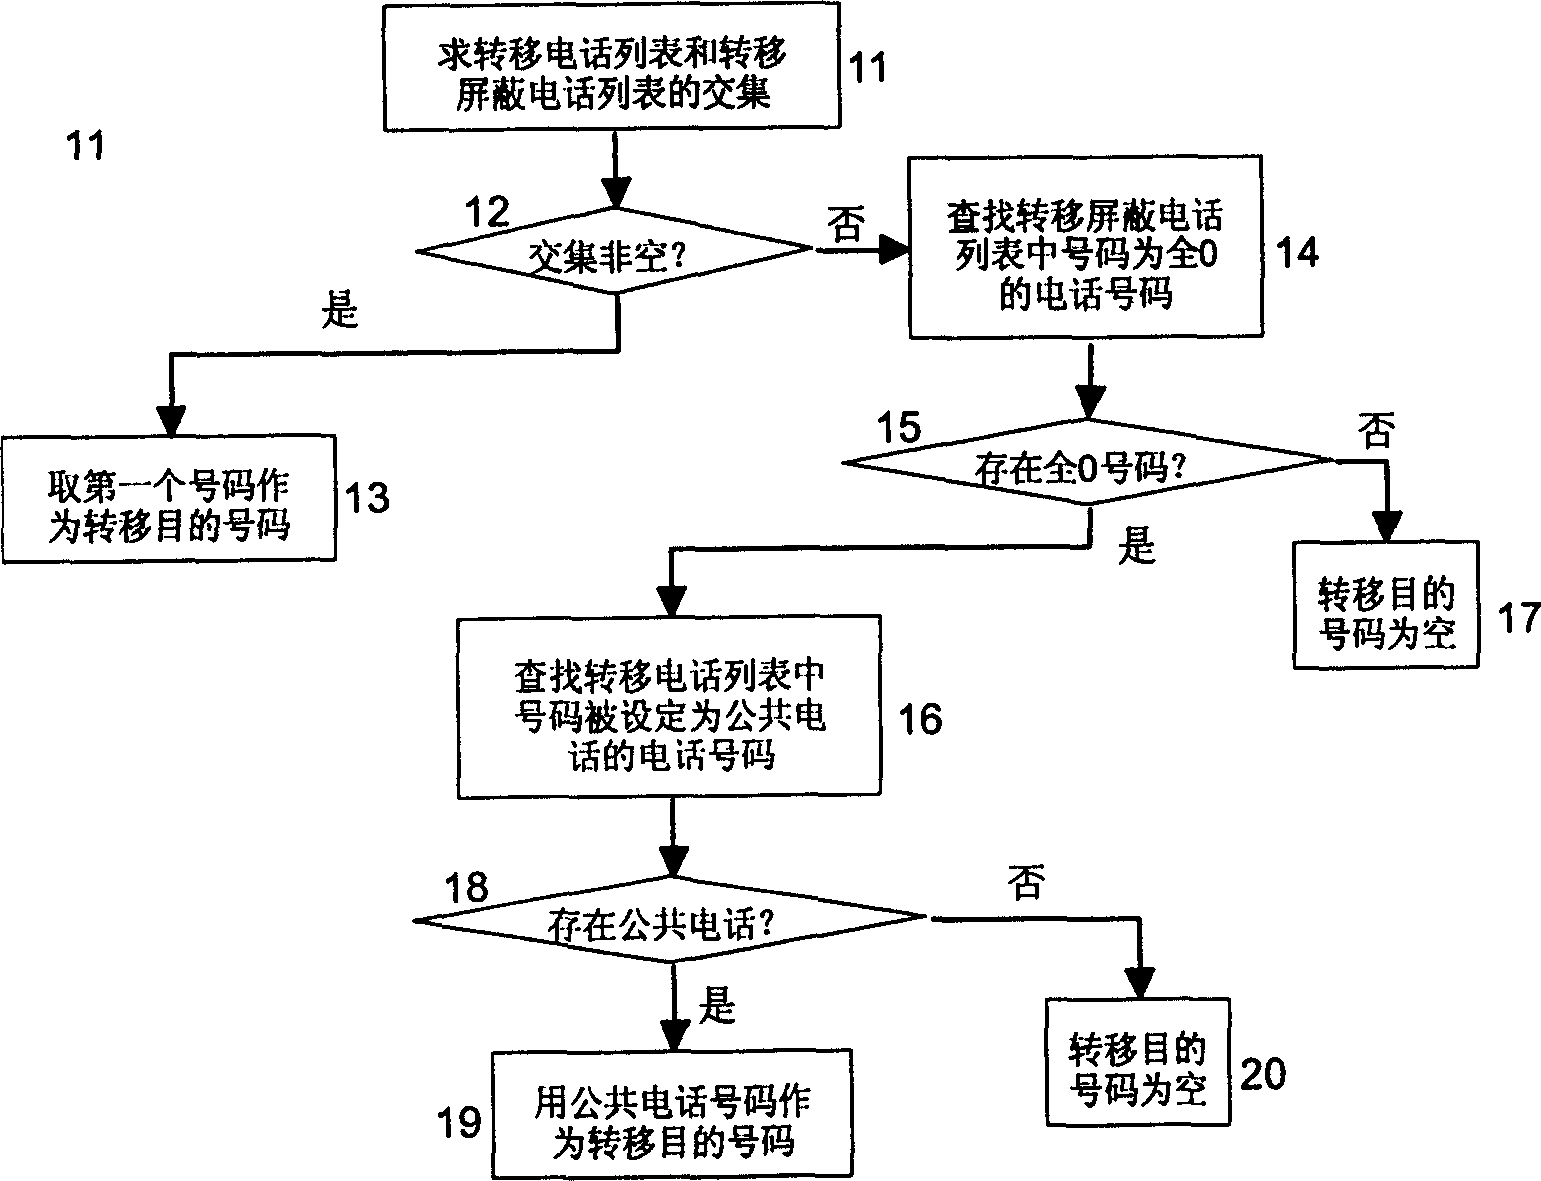 Method for implementing intelligent call forwarding of mobile phone